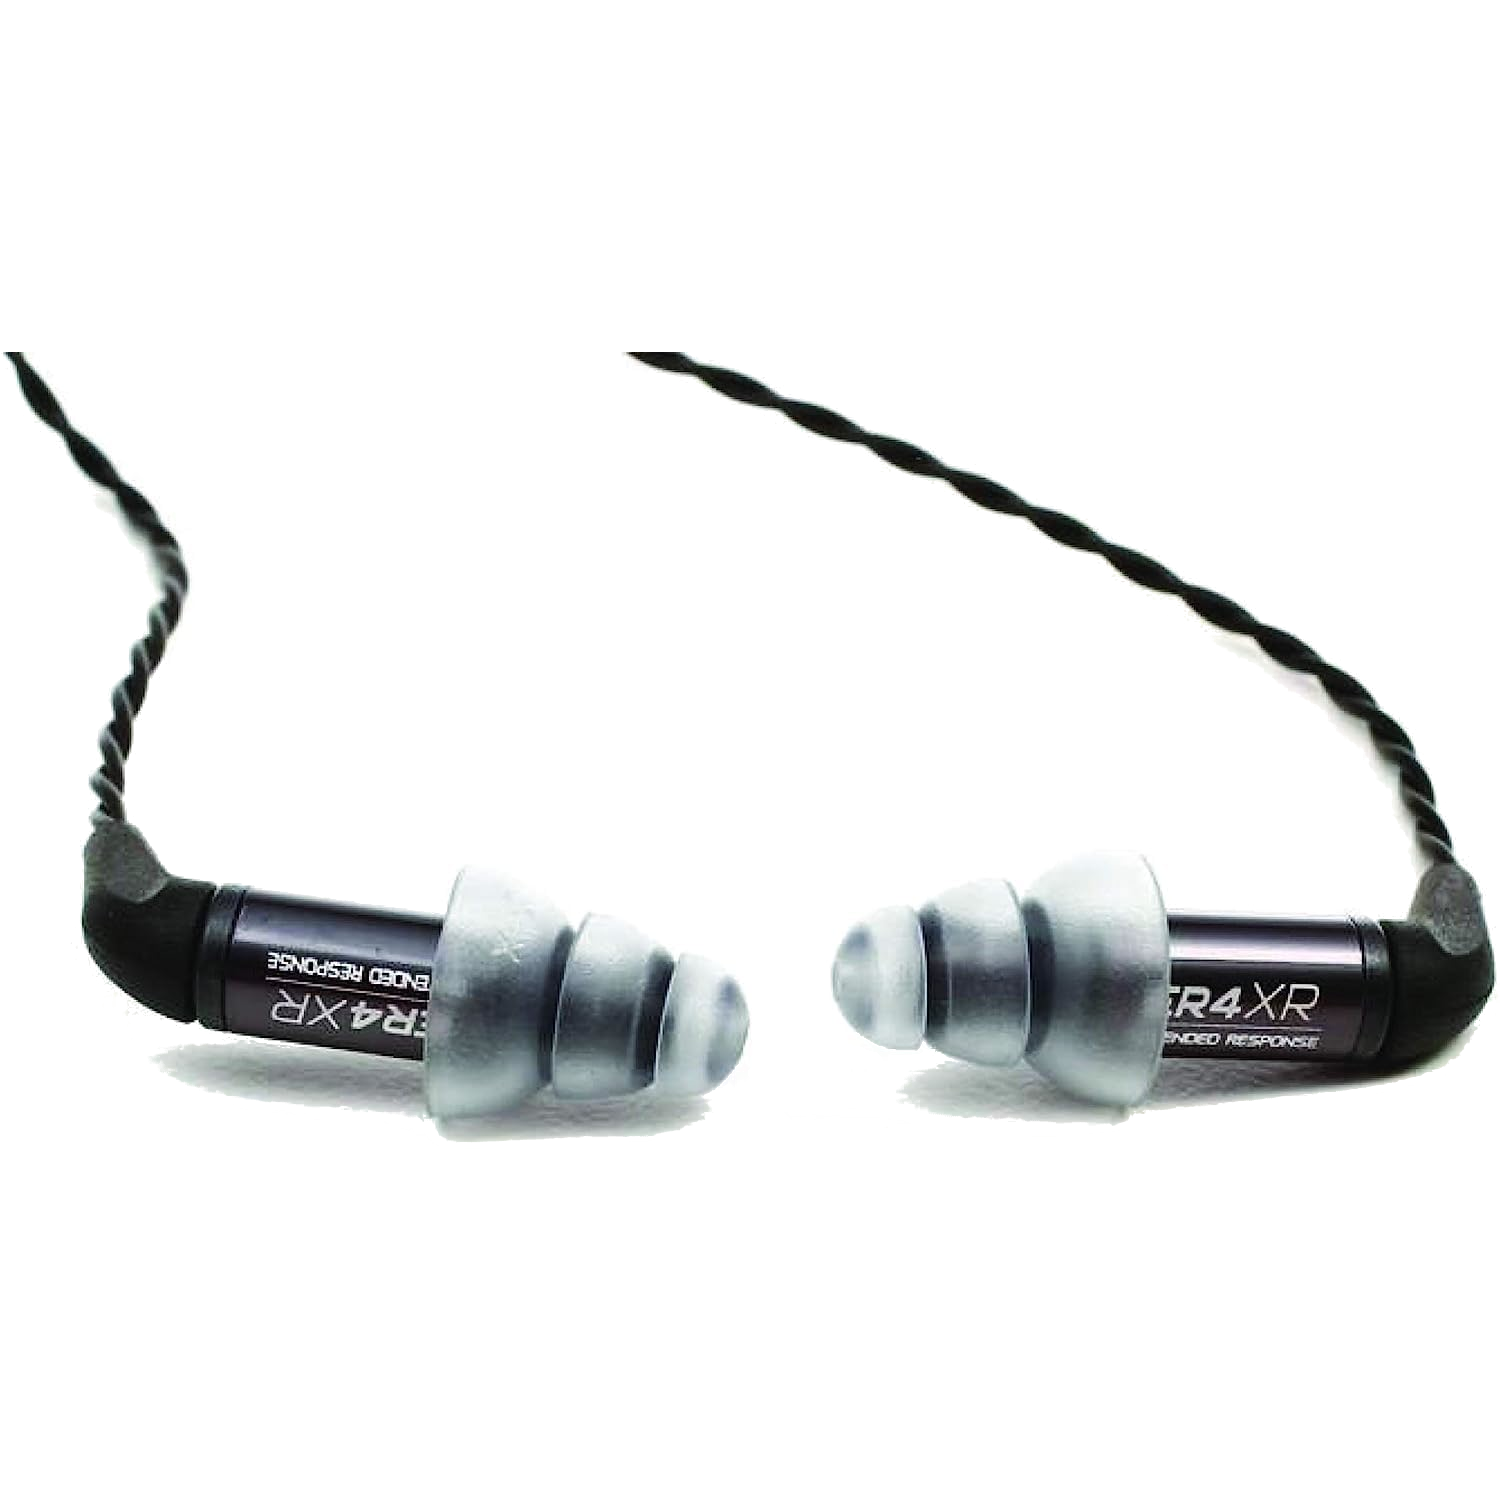 Etymotic ER4XR earbuds on a transparent background.